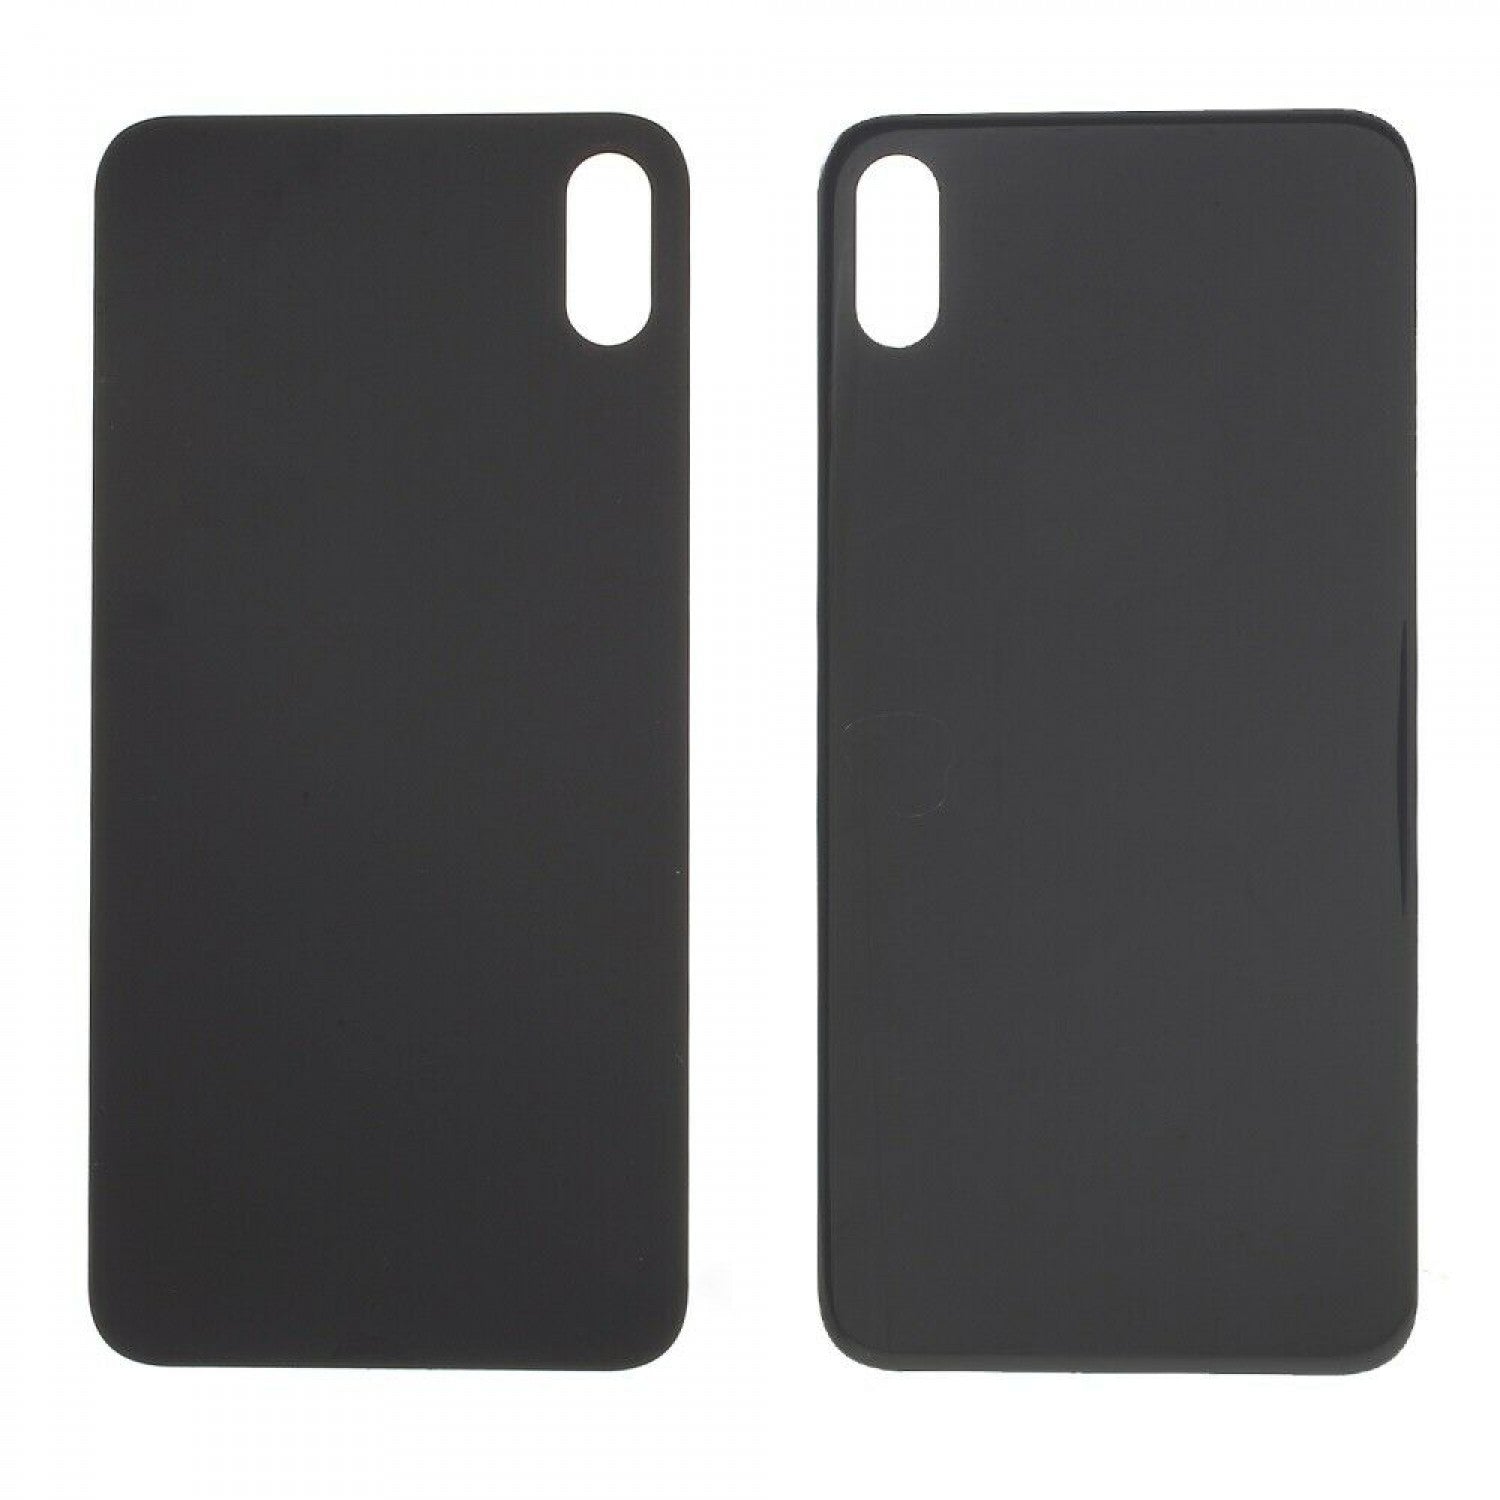 Rear Glass Panel With Big Hole Compatible For iPhone XS Max